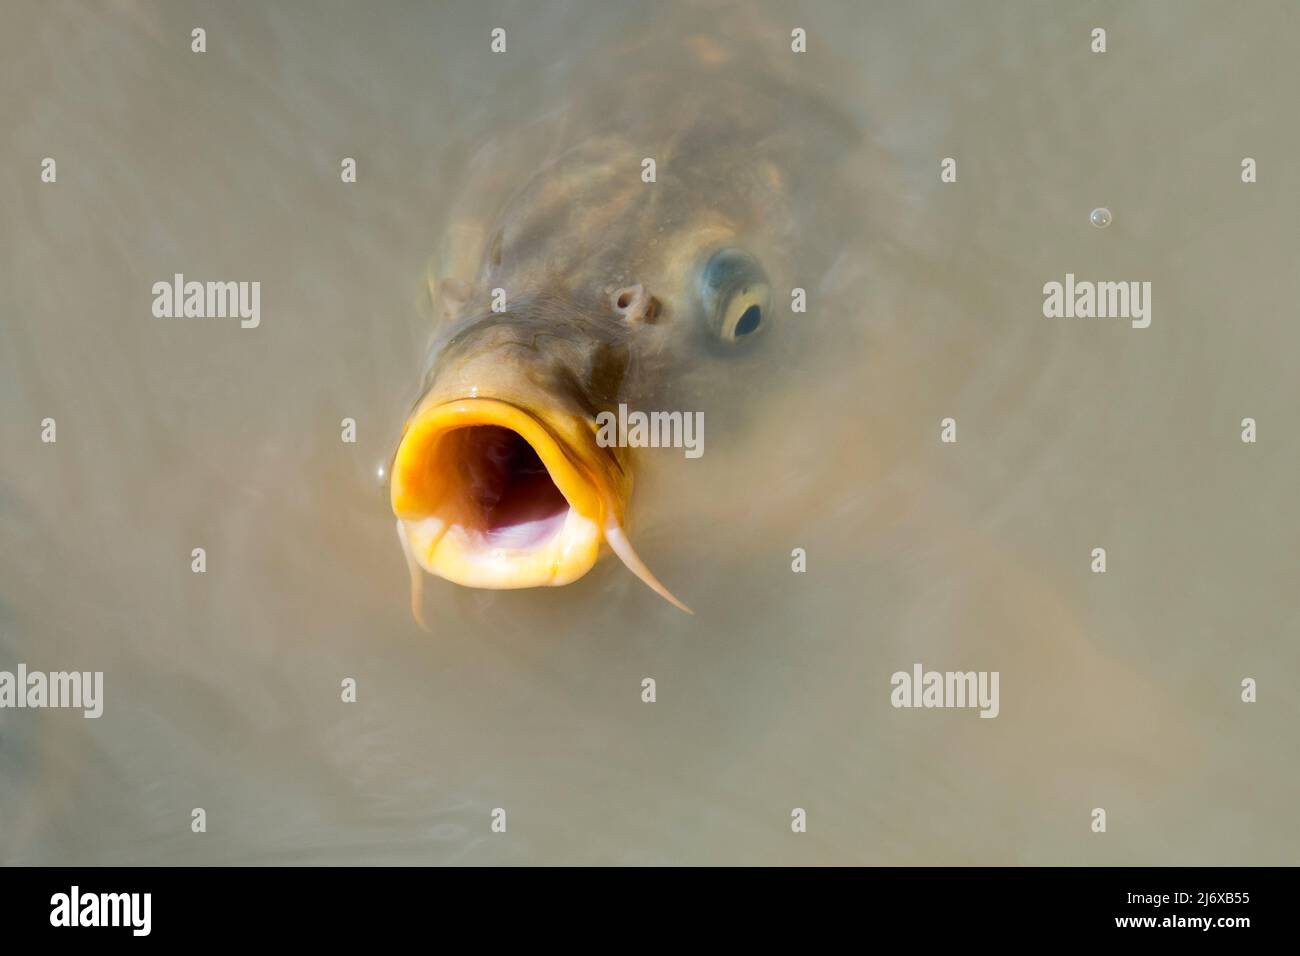 Eurasian carp / European carp / common carp (Cyprinus carpio) breathing and surfacing with big open mouth for food in pond Stock Photo